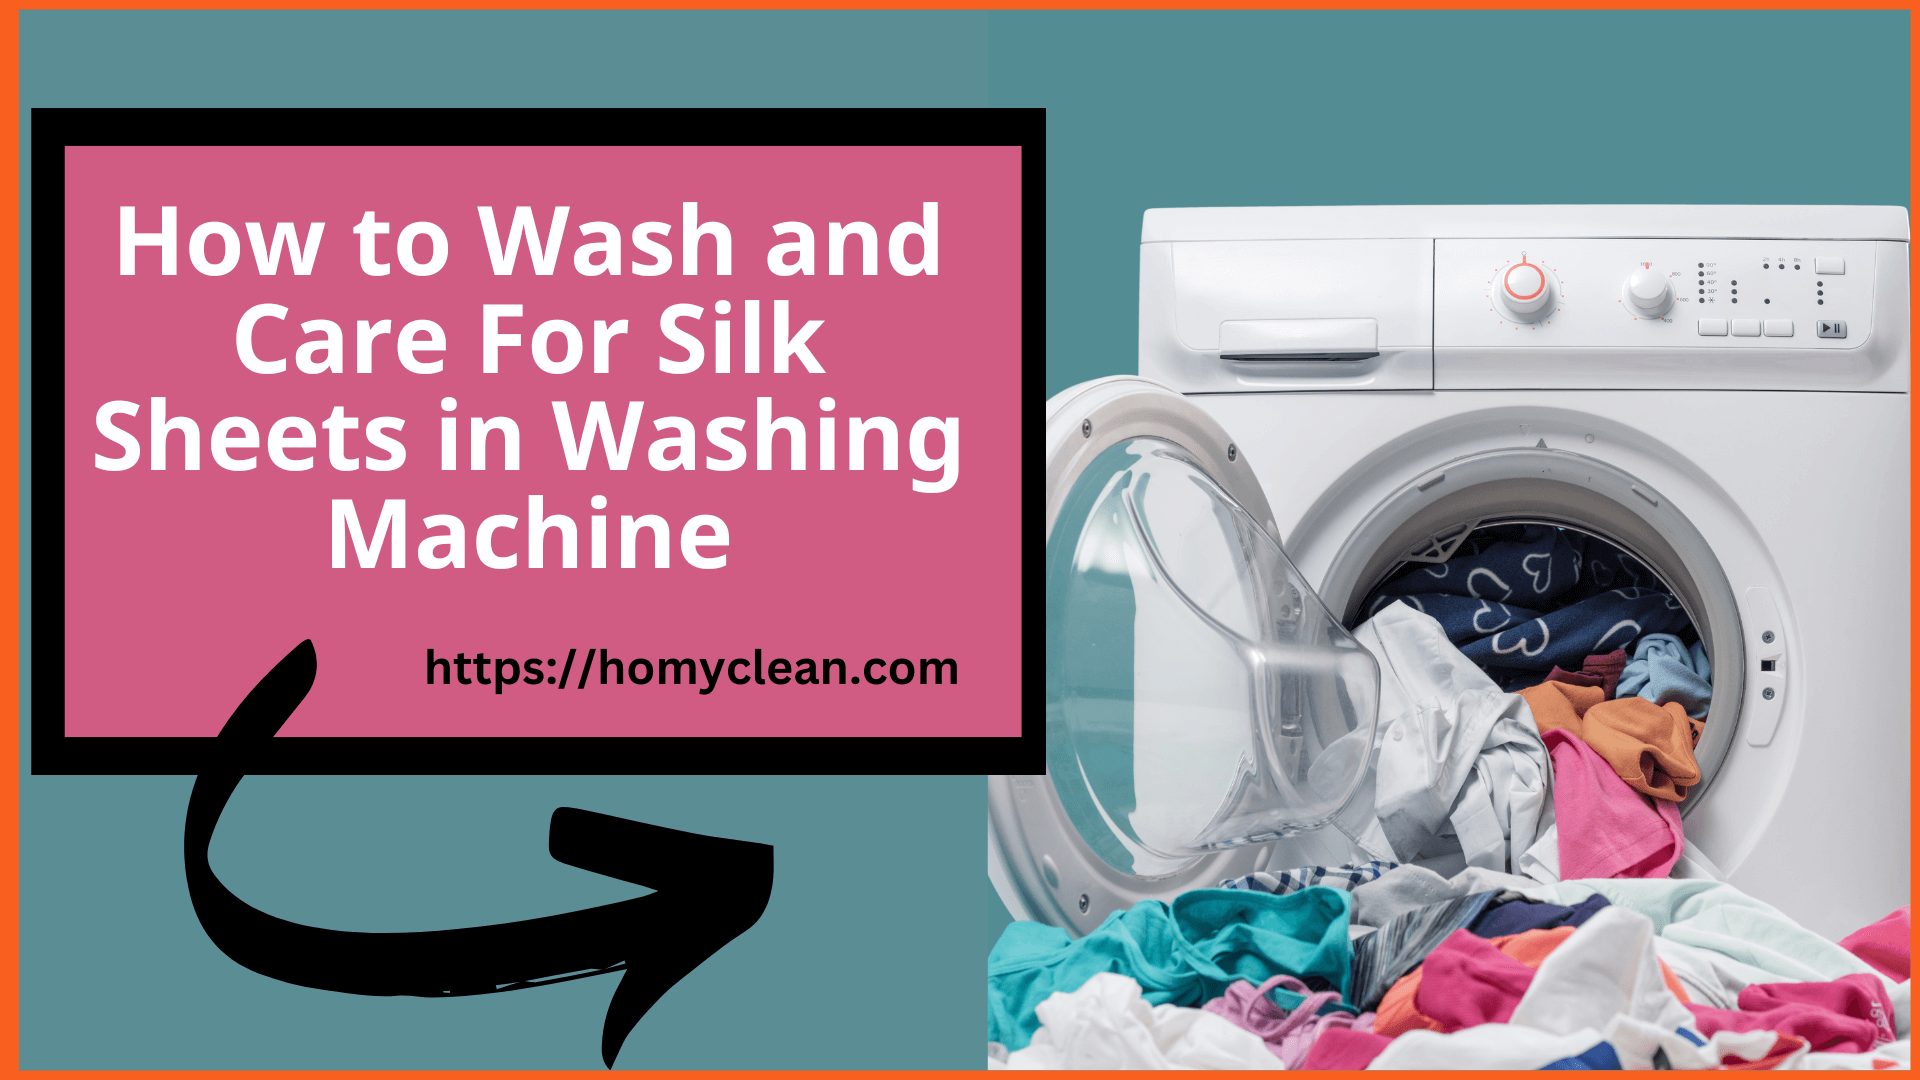 How to Wash and Care for Silk Sheets in the Washing Machine